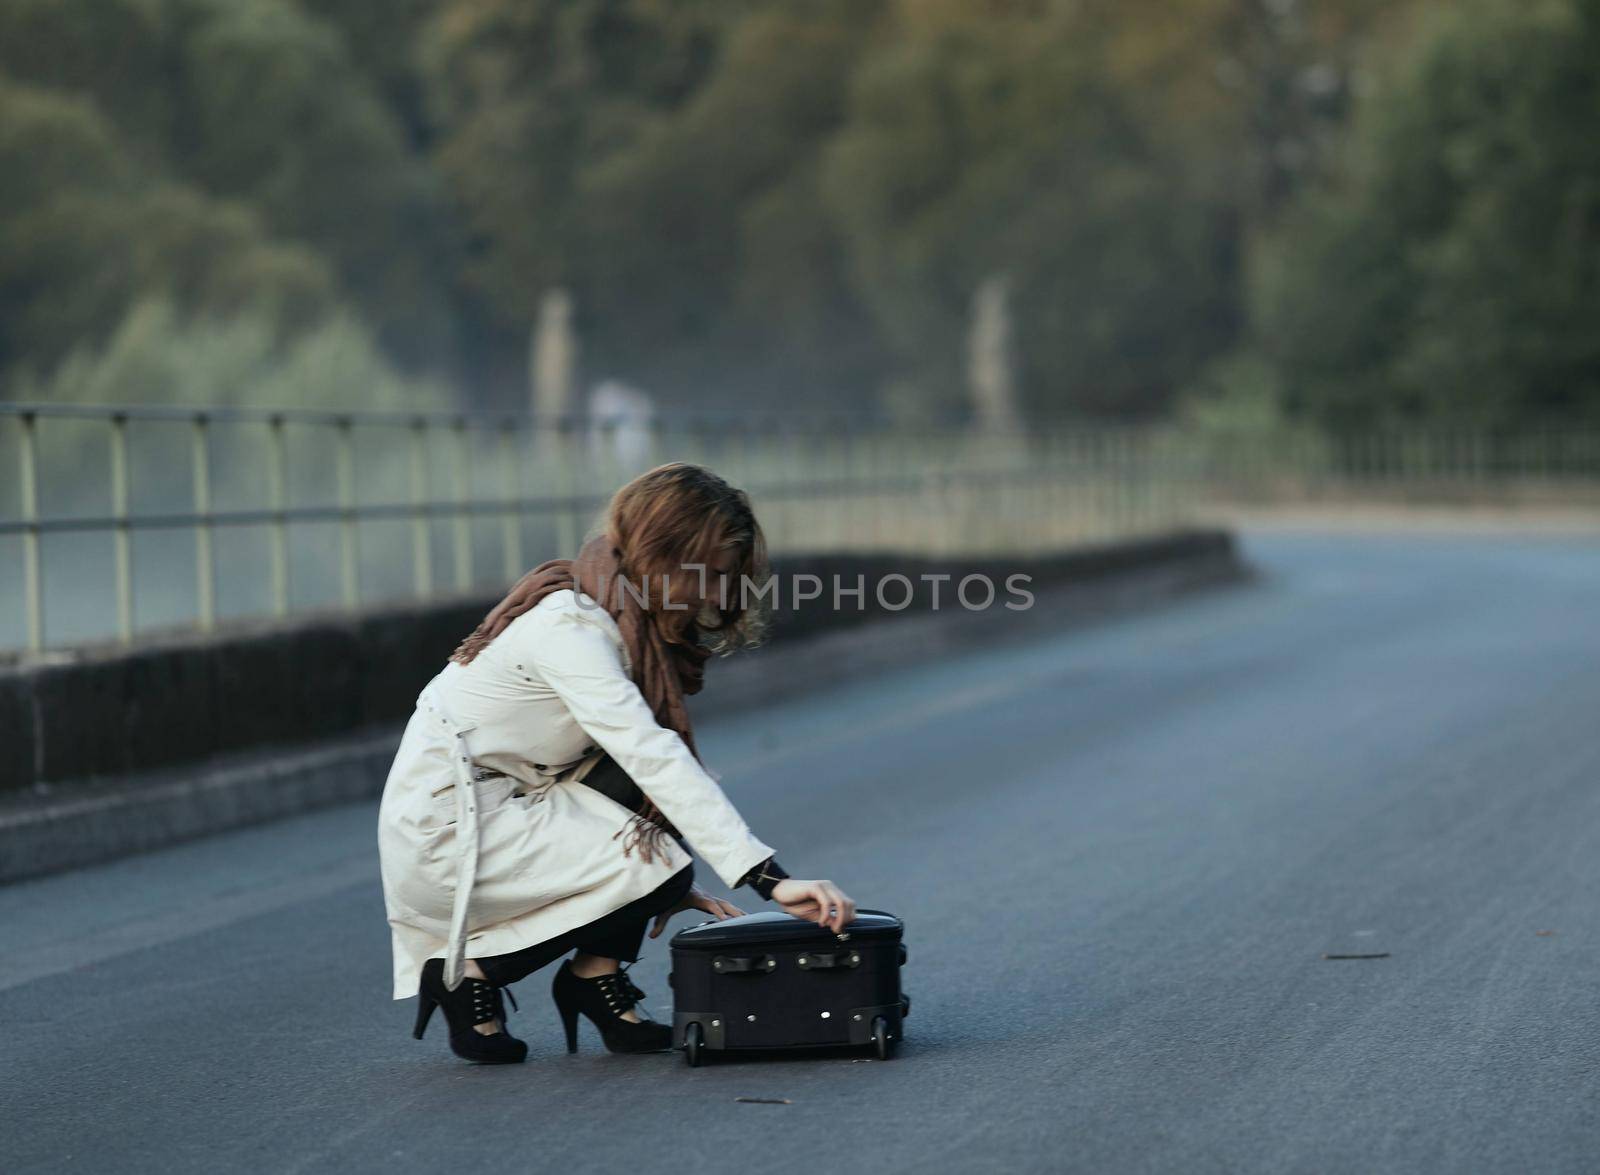 dramatic moment in life of breakup of a relationship with a once loved one fleeing with one suitcase in the photo, the girl collects things in a suitcase in the middle of the roadway by Costin